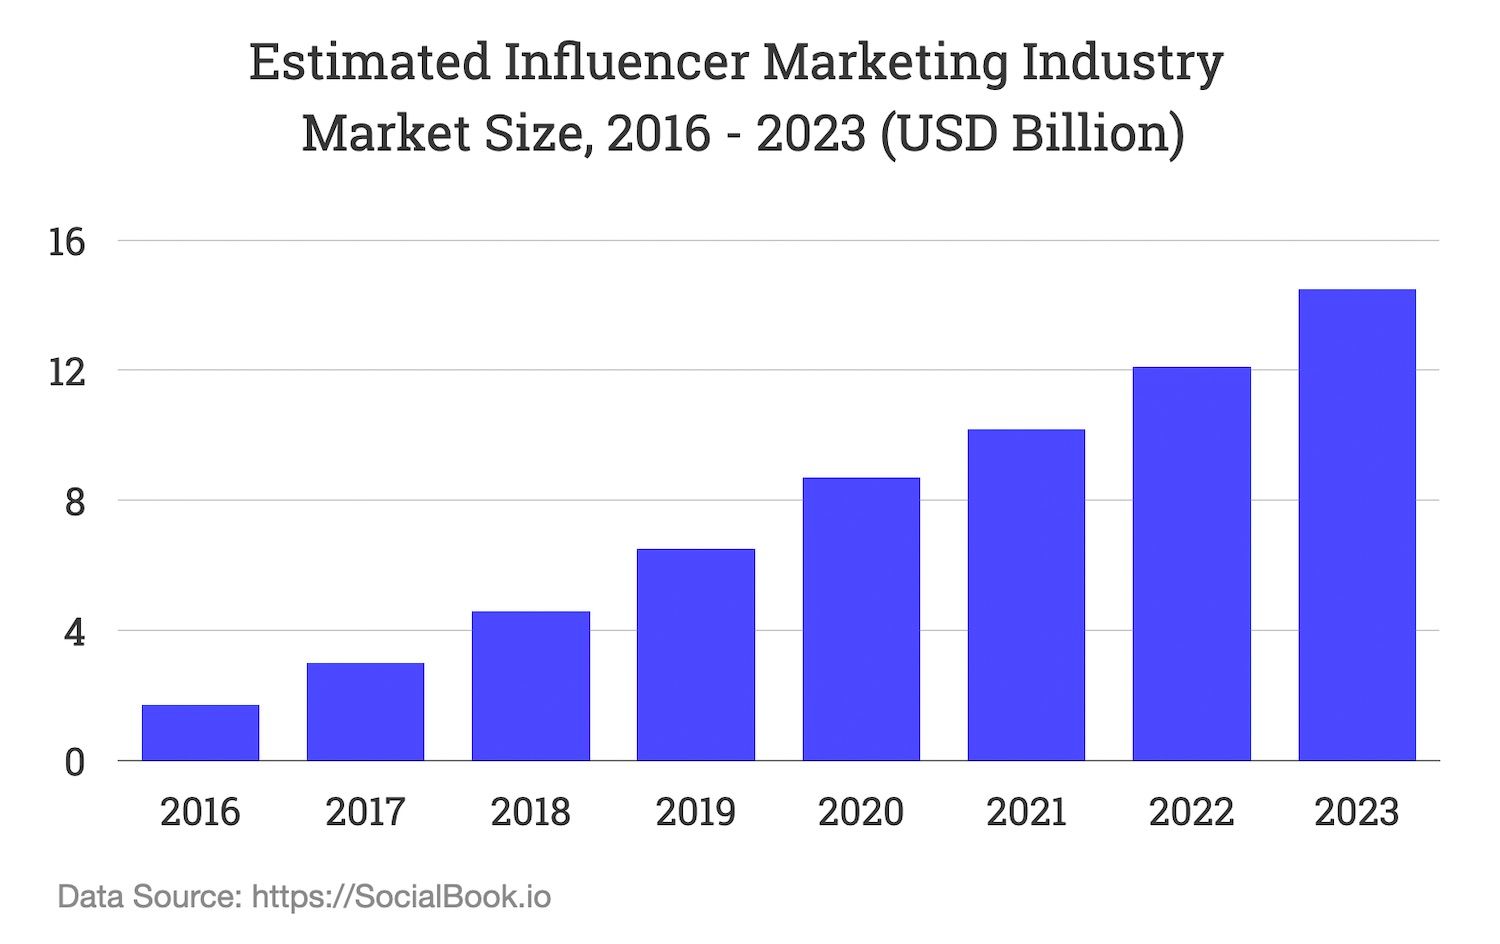 The estimated influencer marketing industry market size from 2016 to 2023, in billion USD.